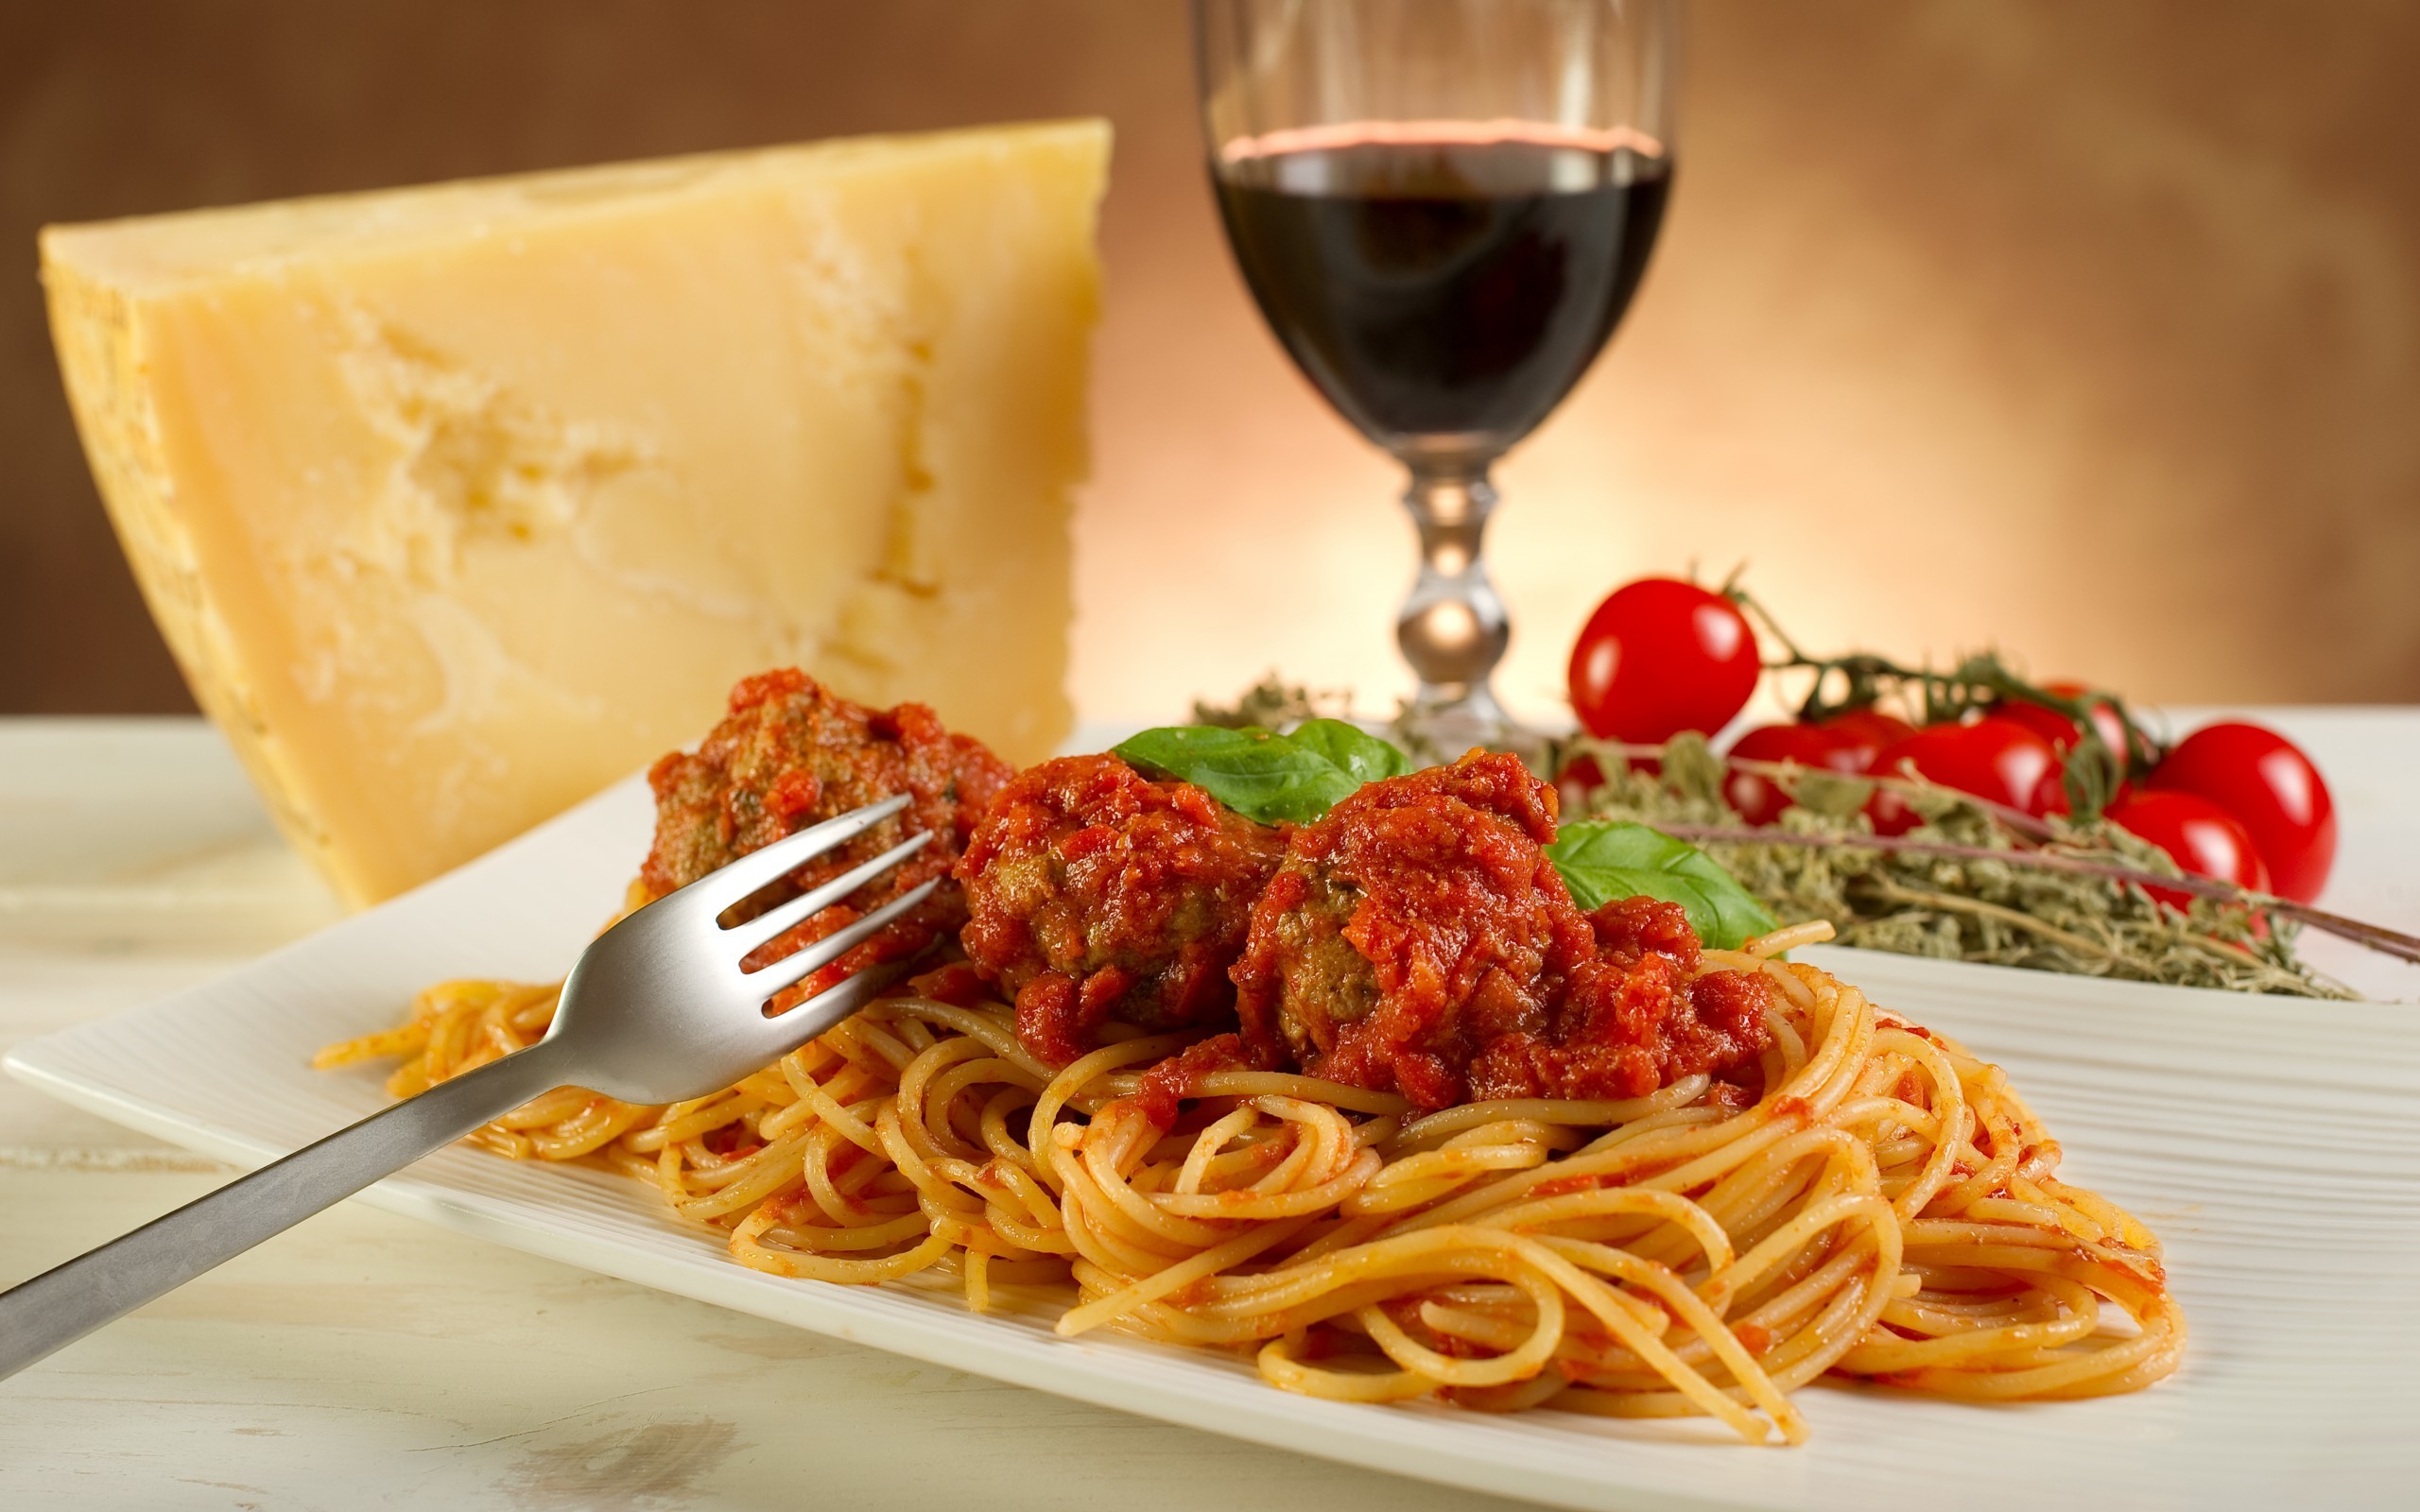 Australia Food And Related Products Classifieds - Wine Cheese And Pasta - HD Wallpaper 